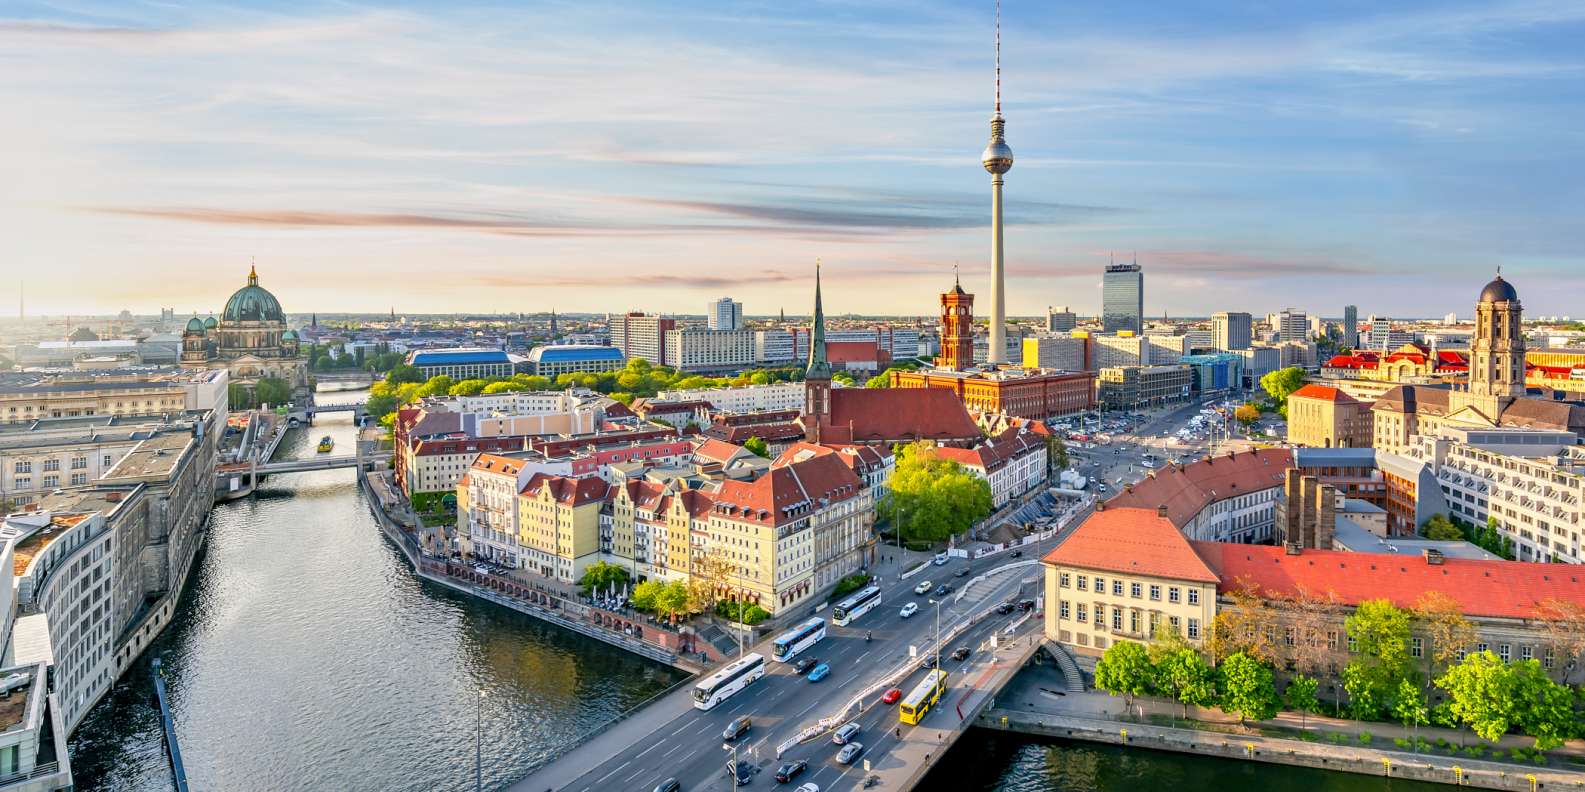 The BEST Berlin and Things to Do in 2023 - FREE | GetYourGuide